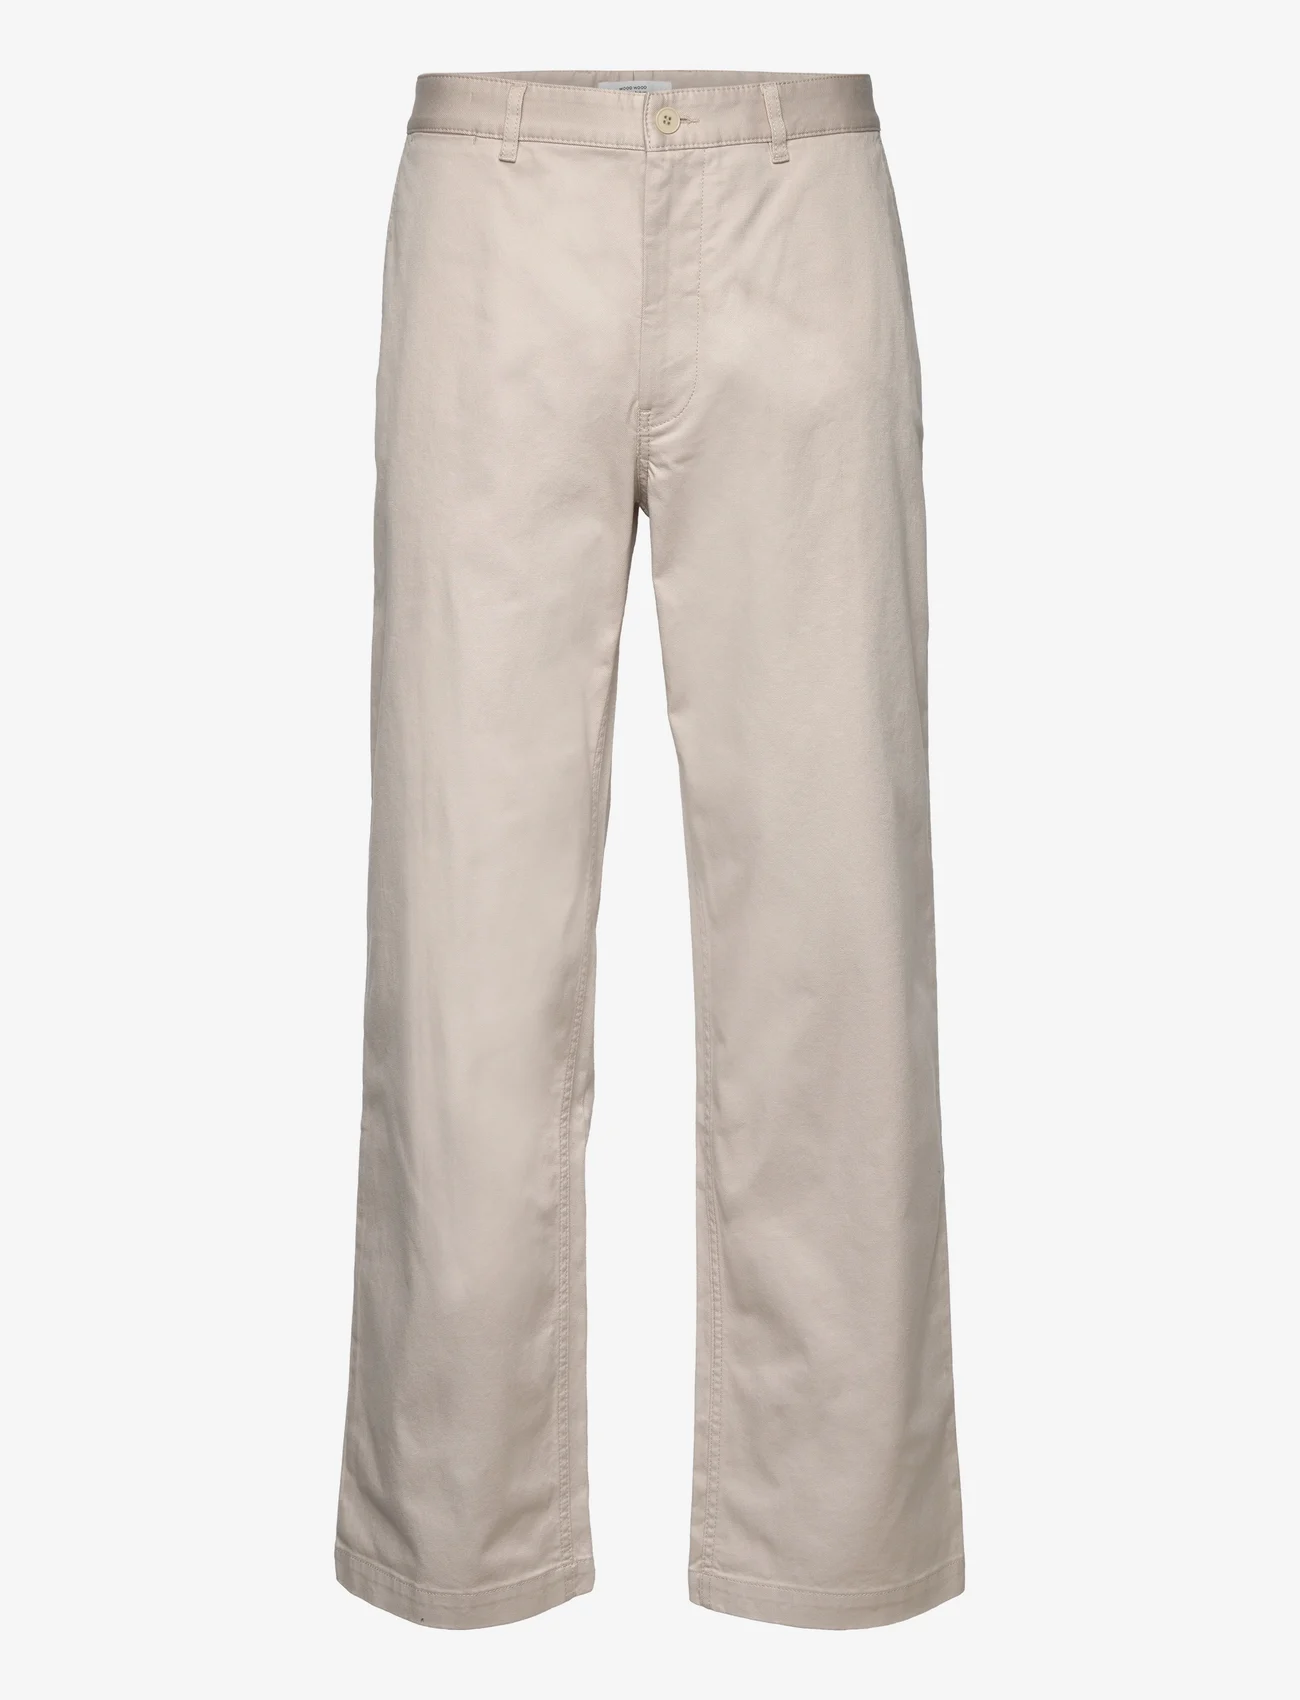 Wood Wood - Stefan classic trousers - chinos - light sand - 0